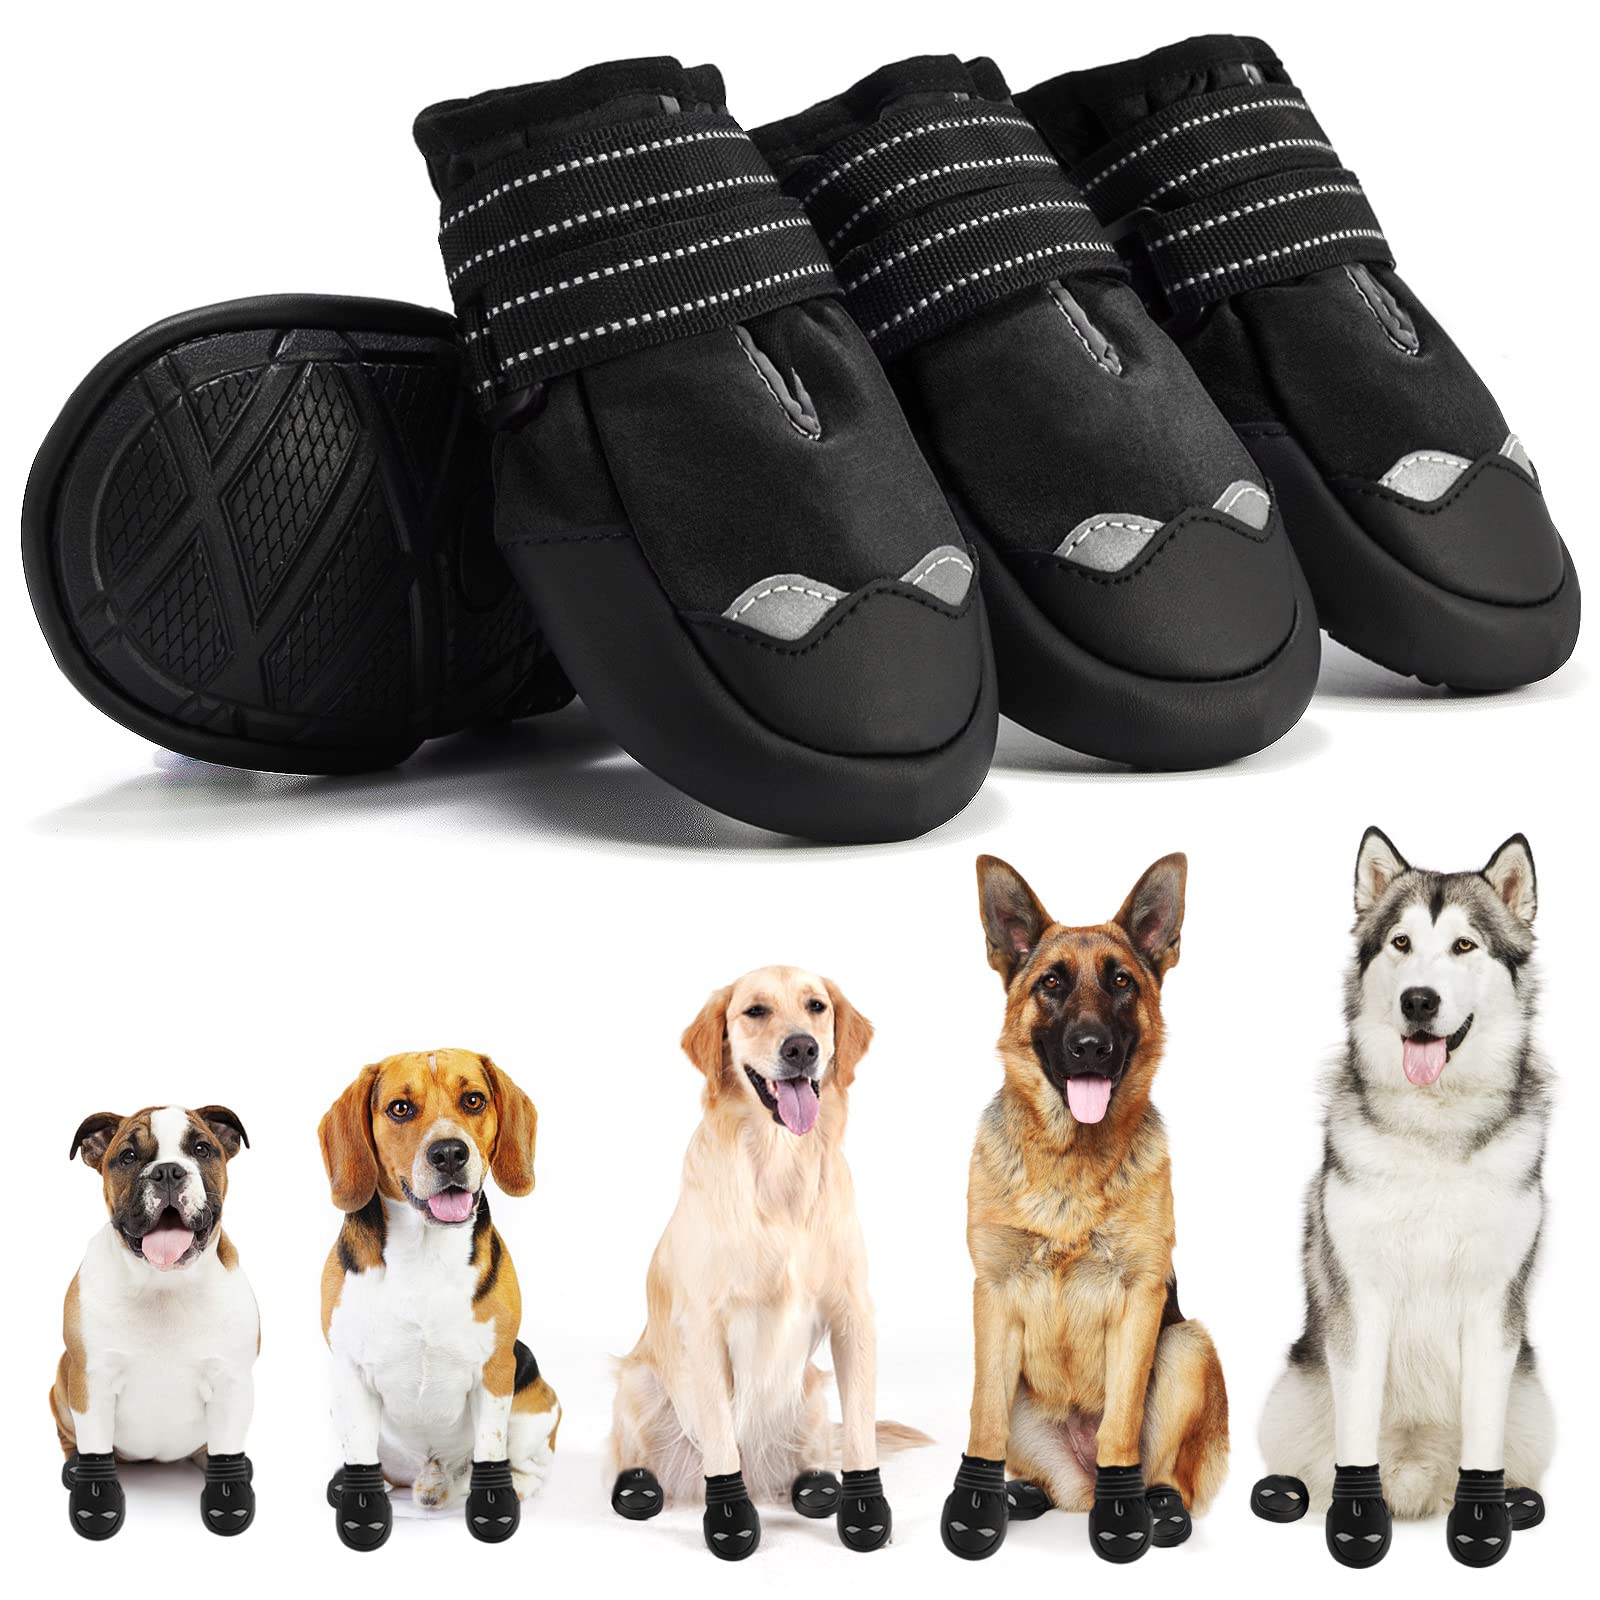 JZXOIVA Dog Boots Waterproof Dog Shoes Dog Shoes for Large Dogs Paw Protectors with Non-Slip Rubber Bottom for Outdoor Hiking an